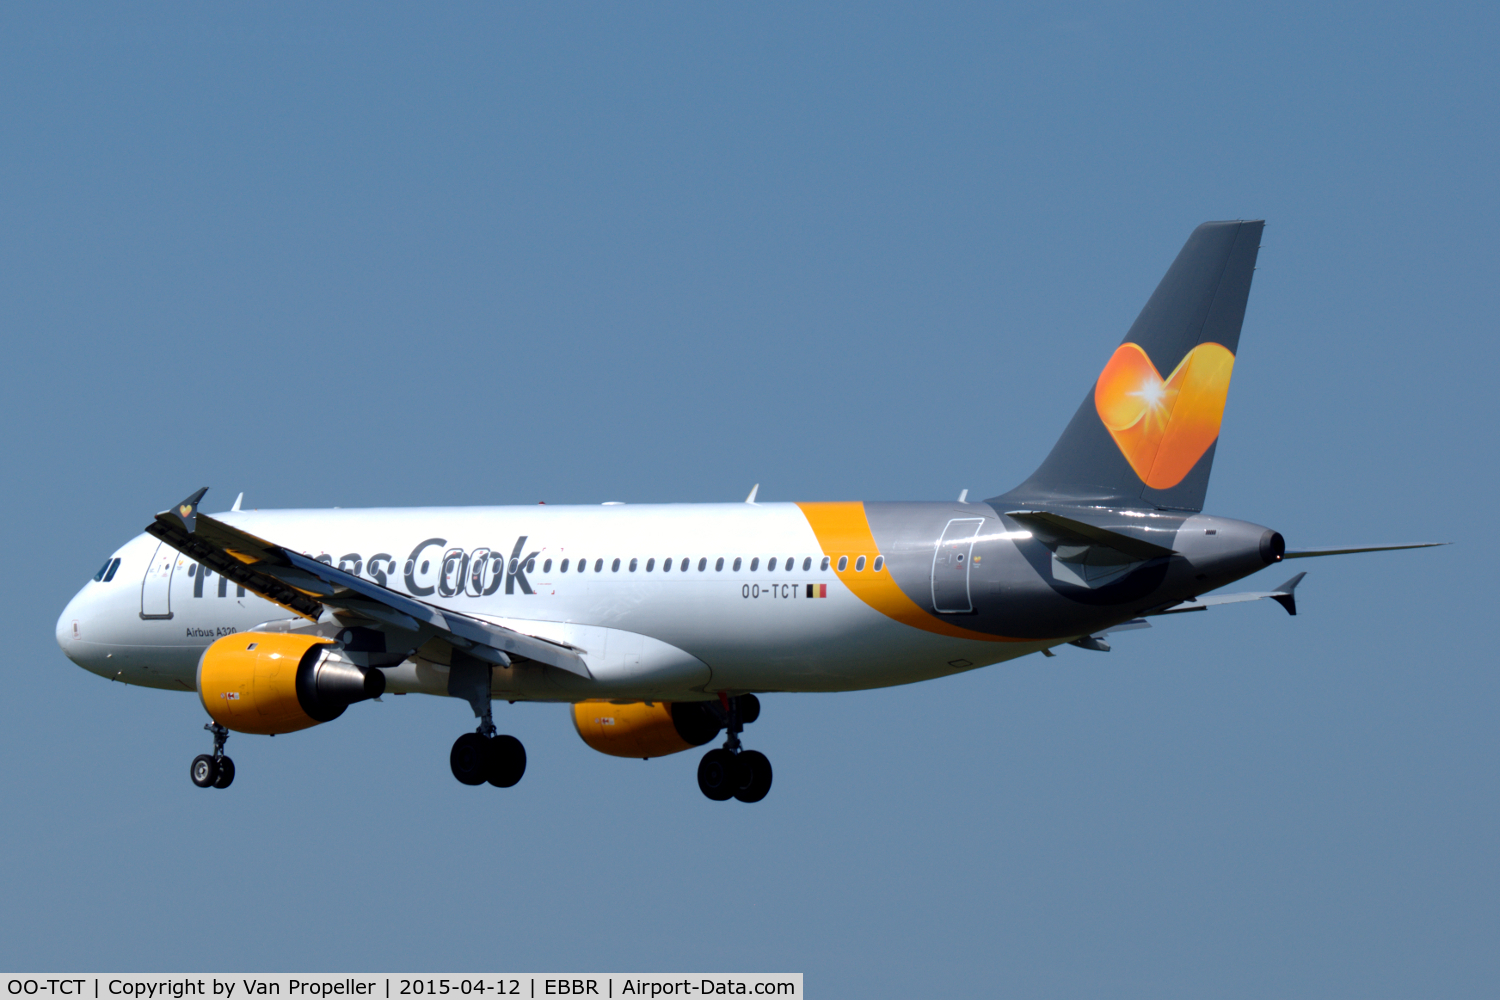 OO-TCT, 2001 Airbus A320-212 C/N 1402, Airbus A320 of Thomas Cook Airlines at Zaventem airport, Brussels, Belgium.